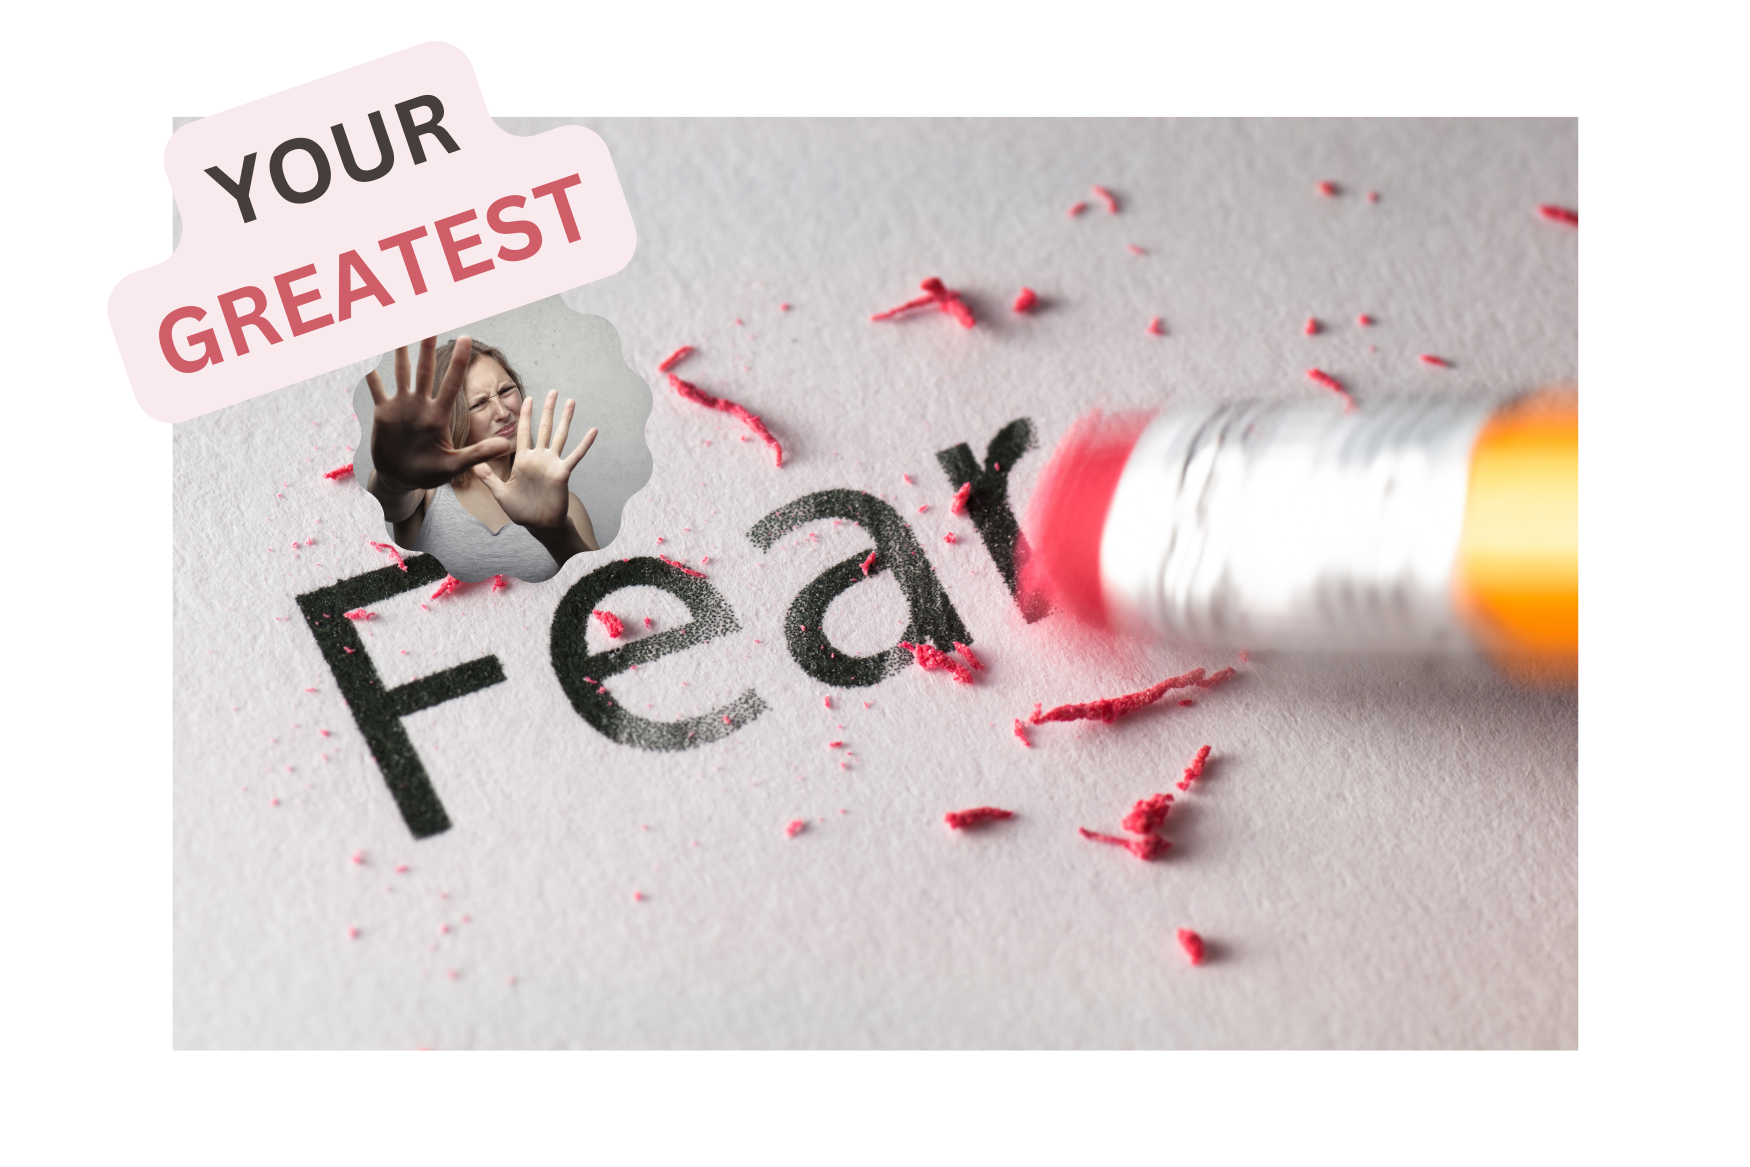 Your greatest fear